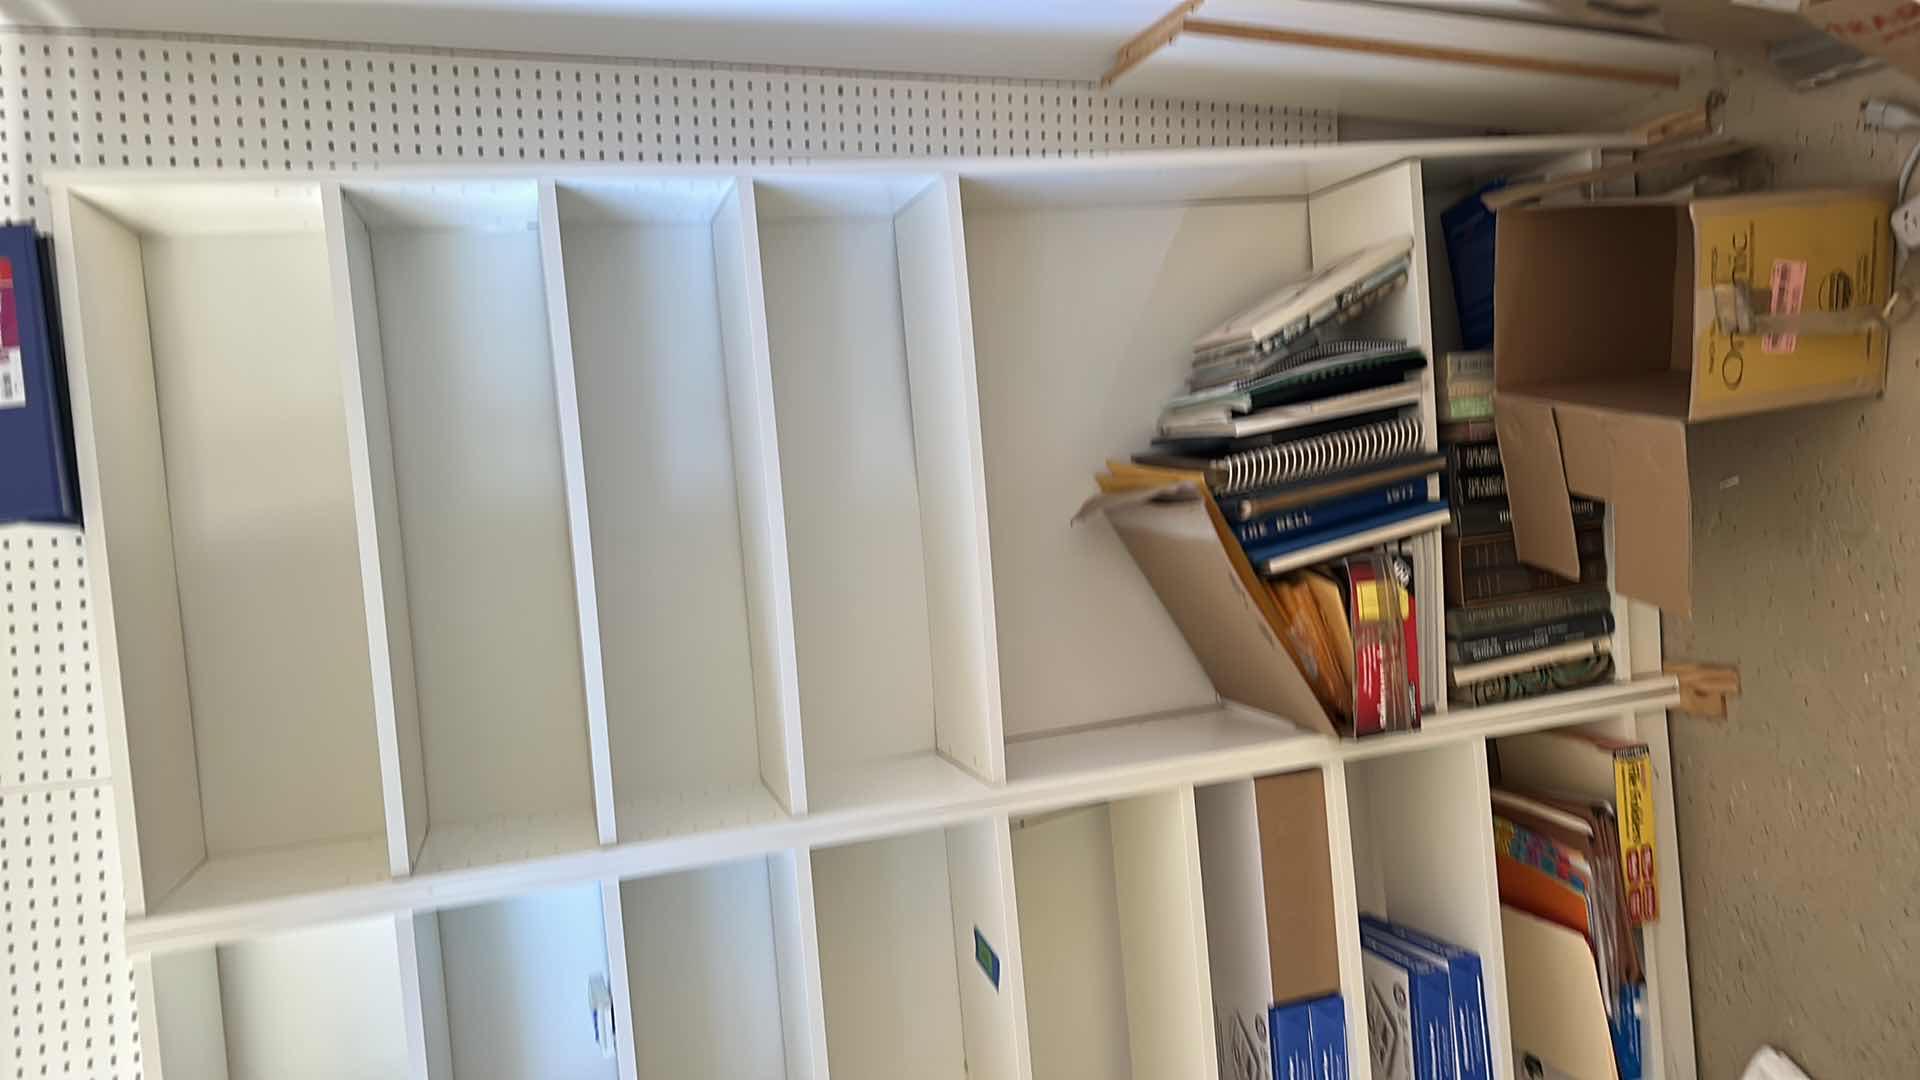 Photo 2 of IKEA WHITE ADJUSTABLE BOOKSHELVES  31 1/2 x 10 1/2 x H79 1/2“
CONTENTS NOT INCLUDED